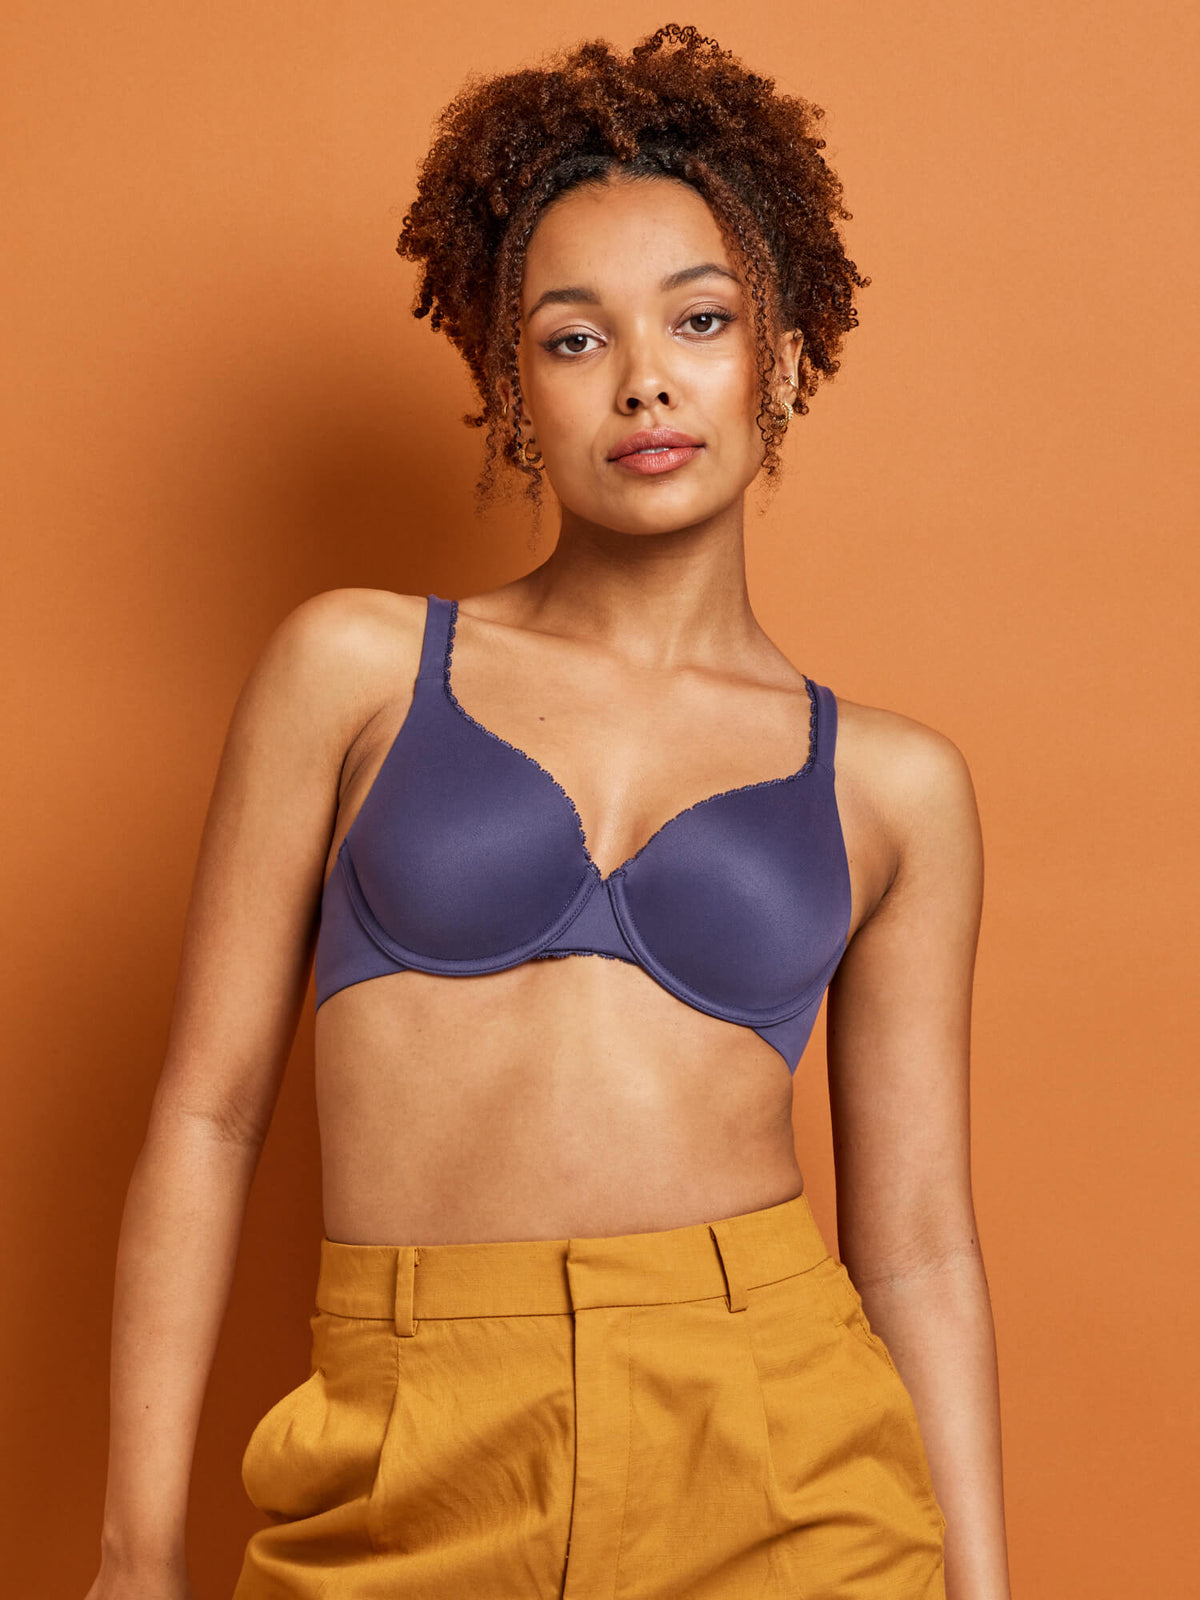 Comfort Lace Trim T-Shirt Bra in Charcoal